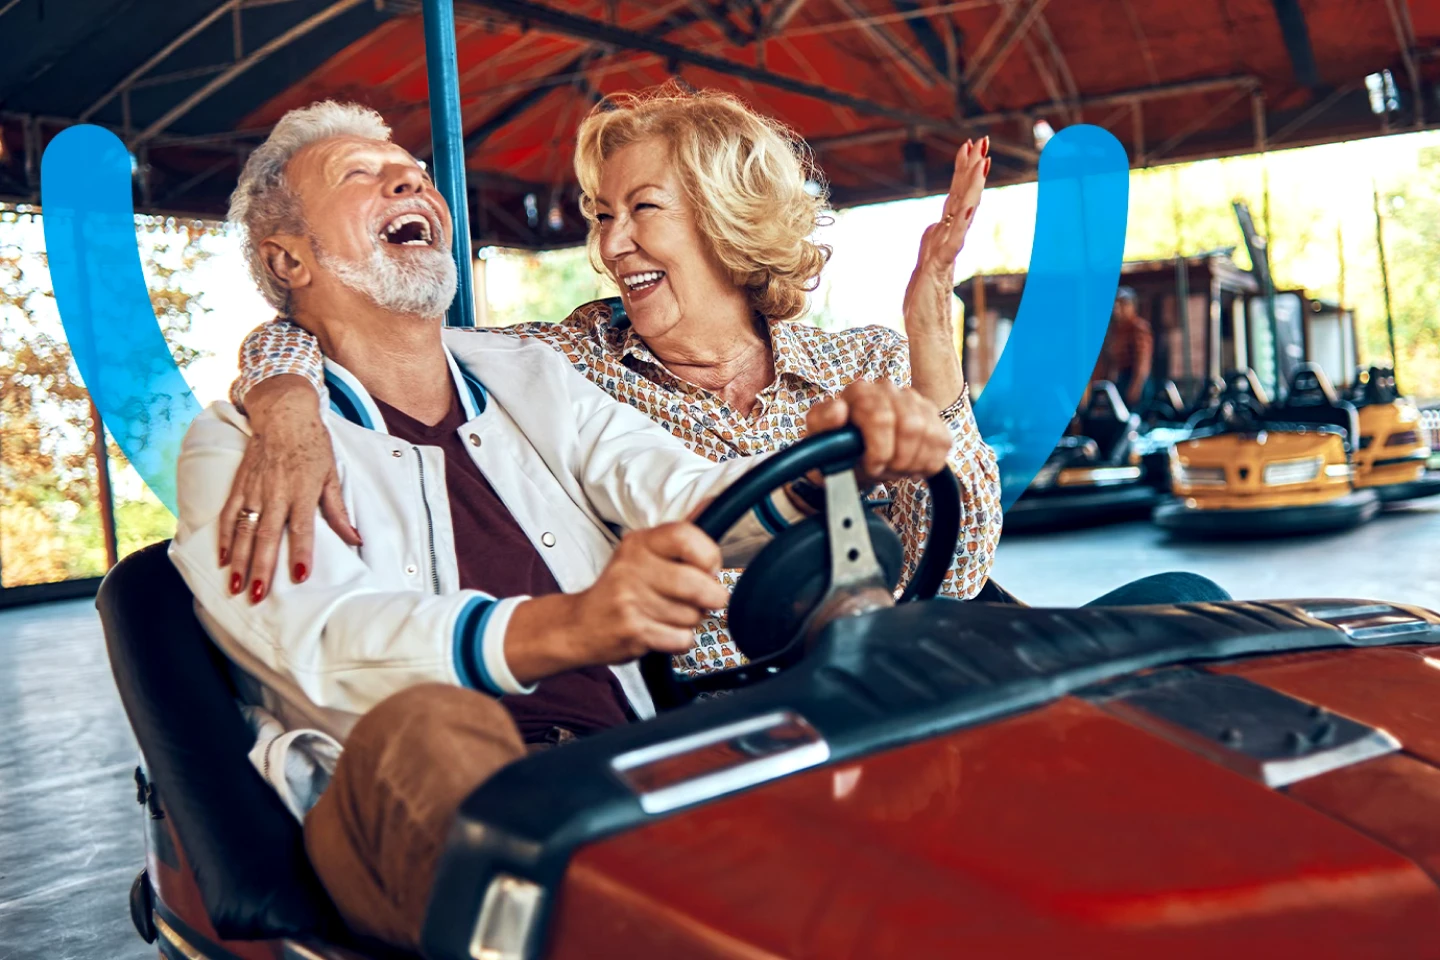 An older couple riding a bumper car at an amusement park with the Aspen dental smile icon on the background.